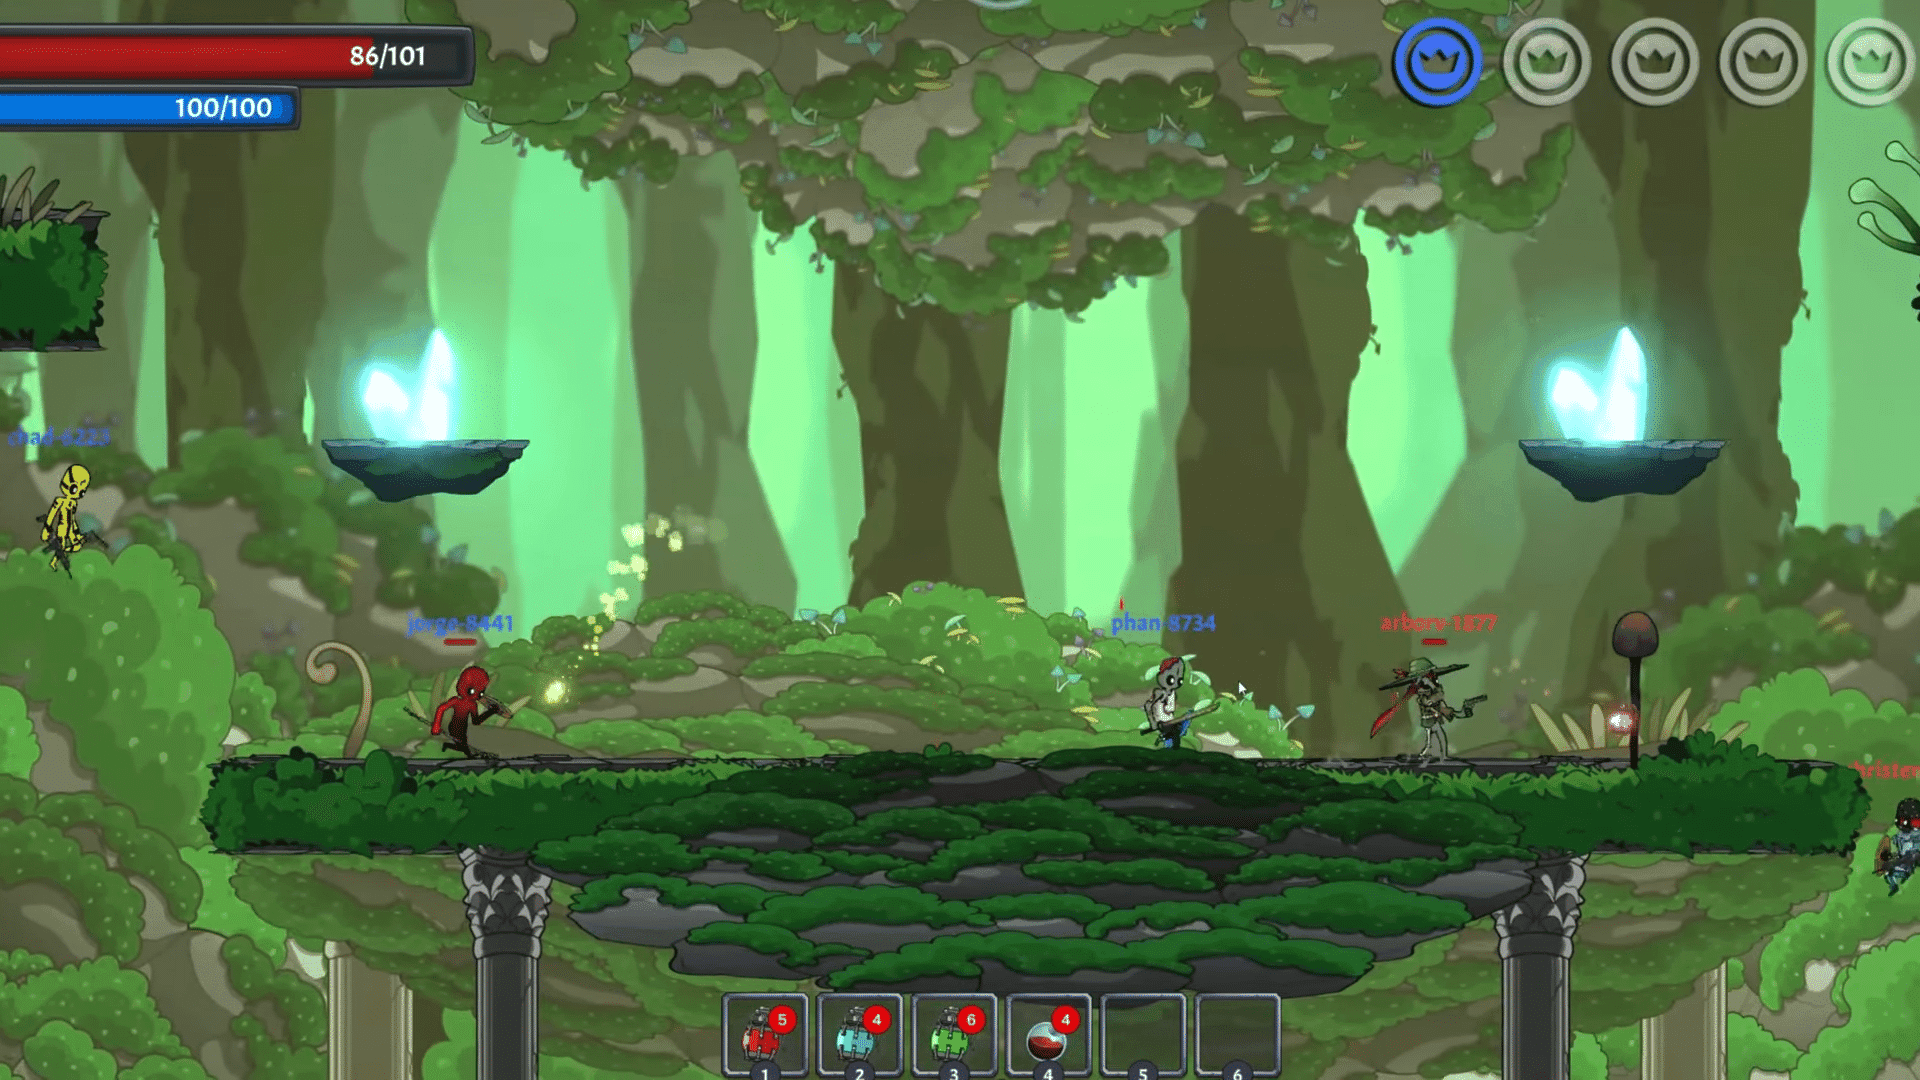 Chronos is a crypto 2D action RPG set in a post-apocalyptic world, requires battling fierce enemies and building empire in NFT-based economy.